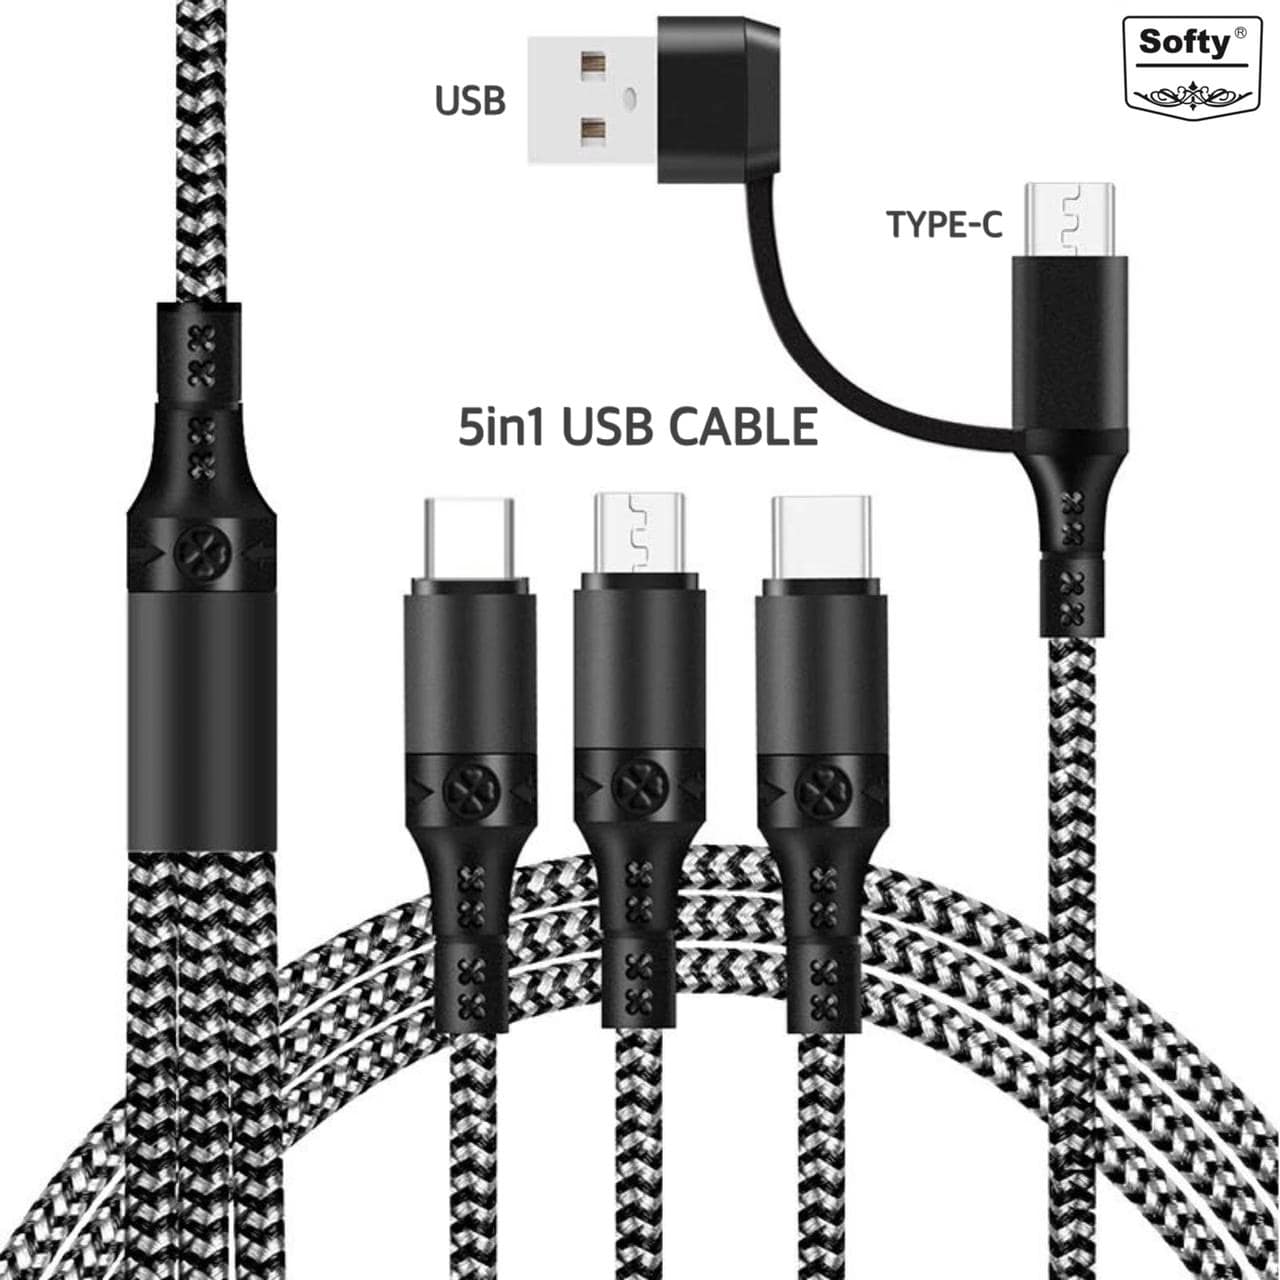 Softy premium quality 5in1 cable-USB Cable-dealsplant